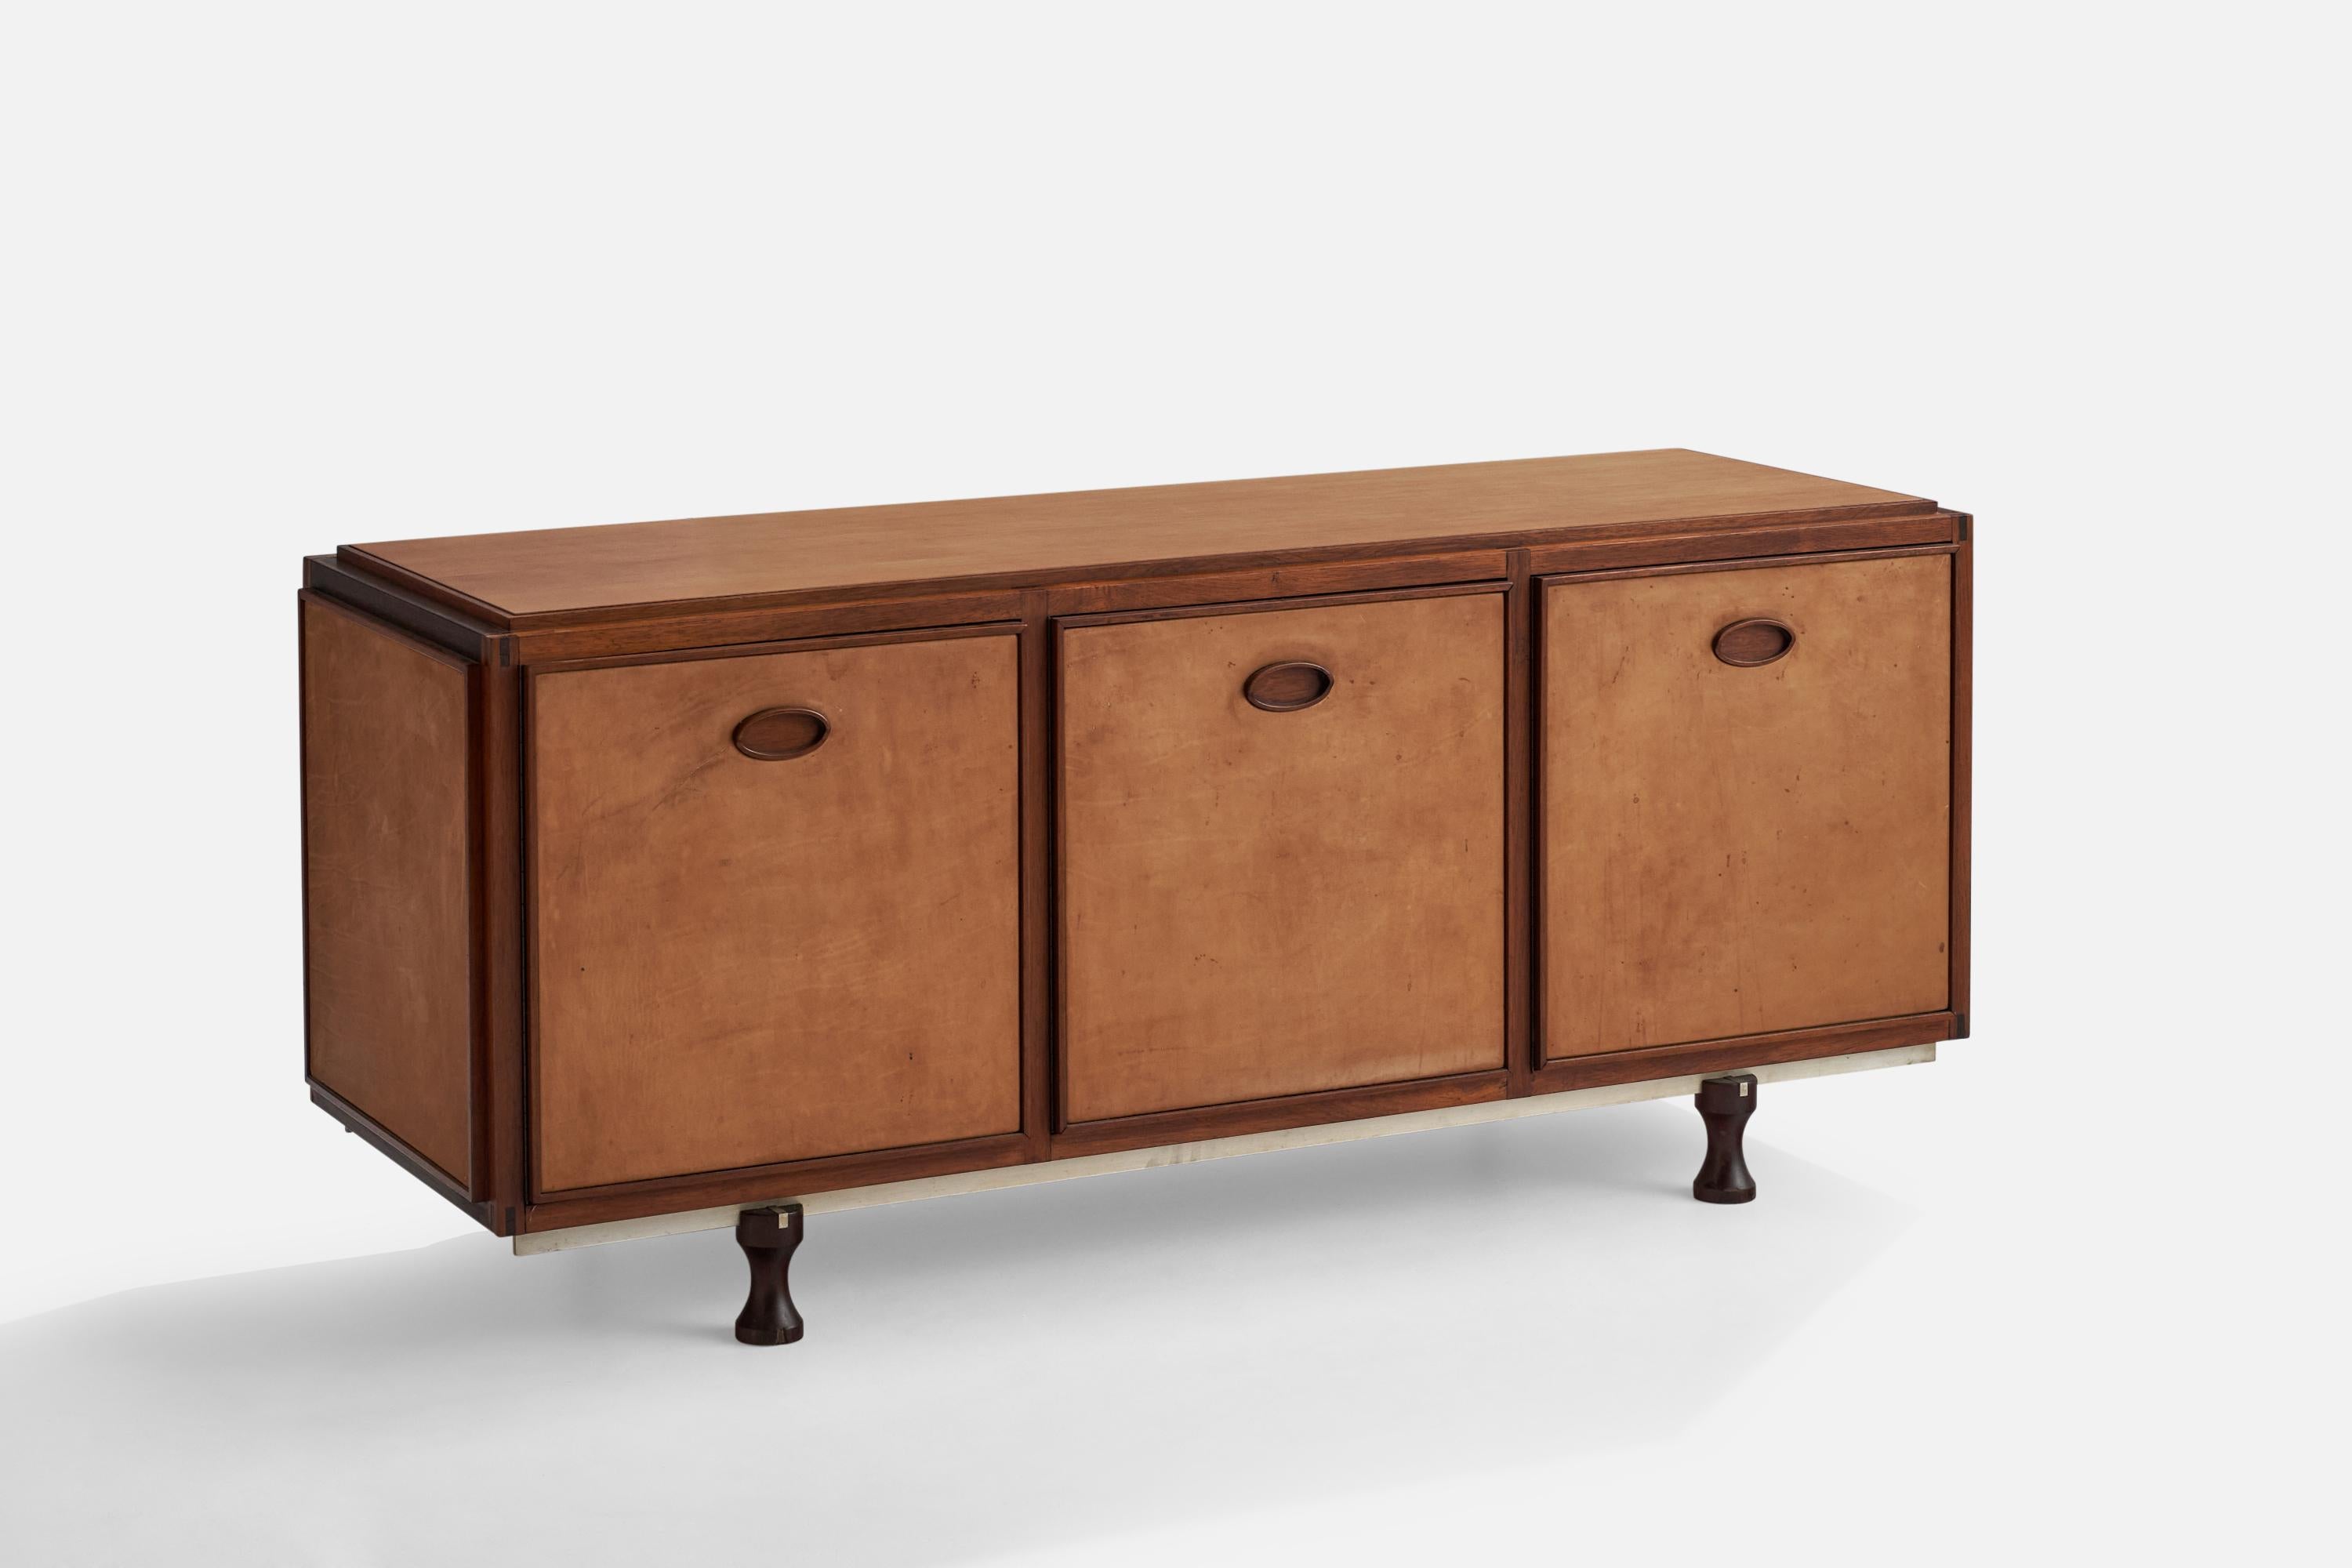 A unique custom order rosewood, steel and leather cabinet or sideboard. designed by Gianfranco Frattini and produced by Bernini, Italy, 1950s. 

All sides finished with leather, enabling the cabinet to be freestanding. Sold with a certificate of